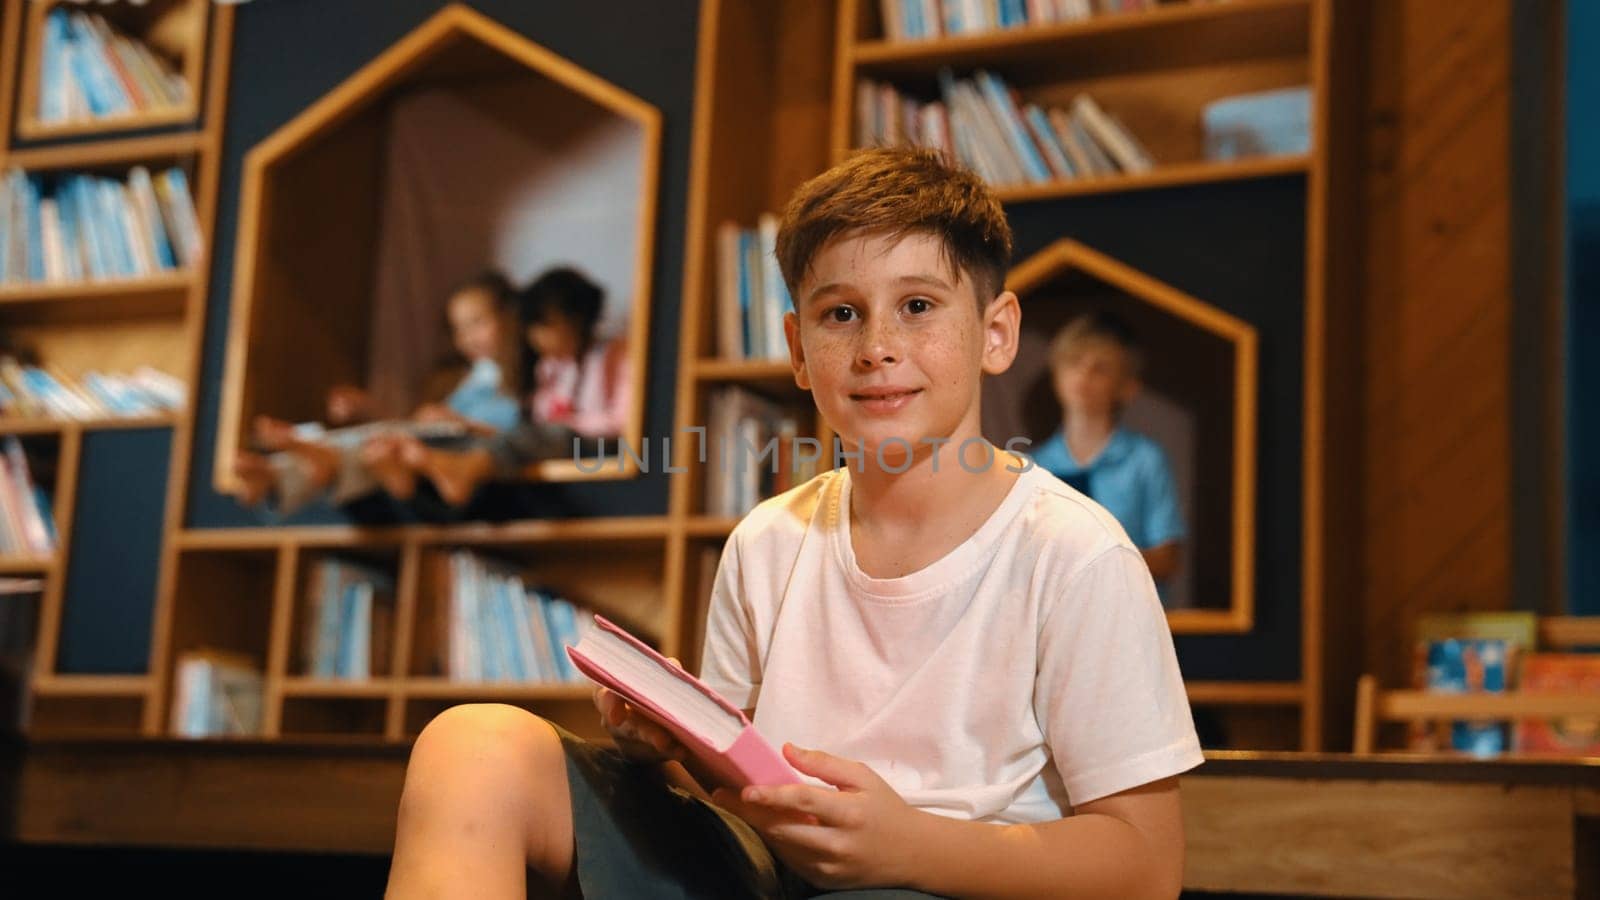 Caucasian boy looking at camera while group of smart students sitting at library. Child studying, learning, reading from novel or textbook while children talking, chitchat about education. Erudition.